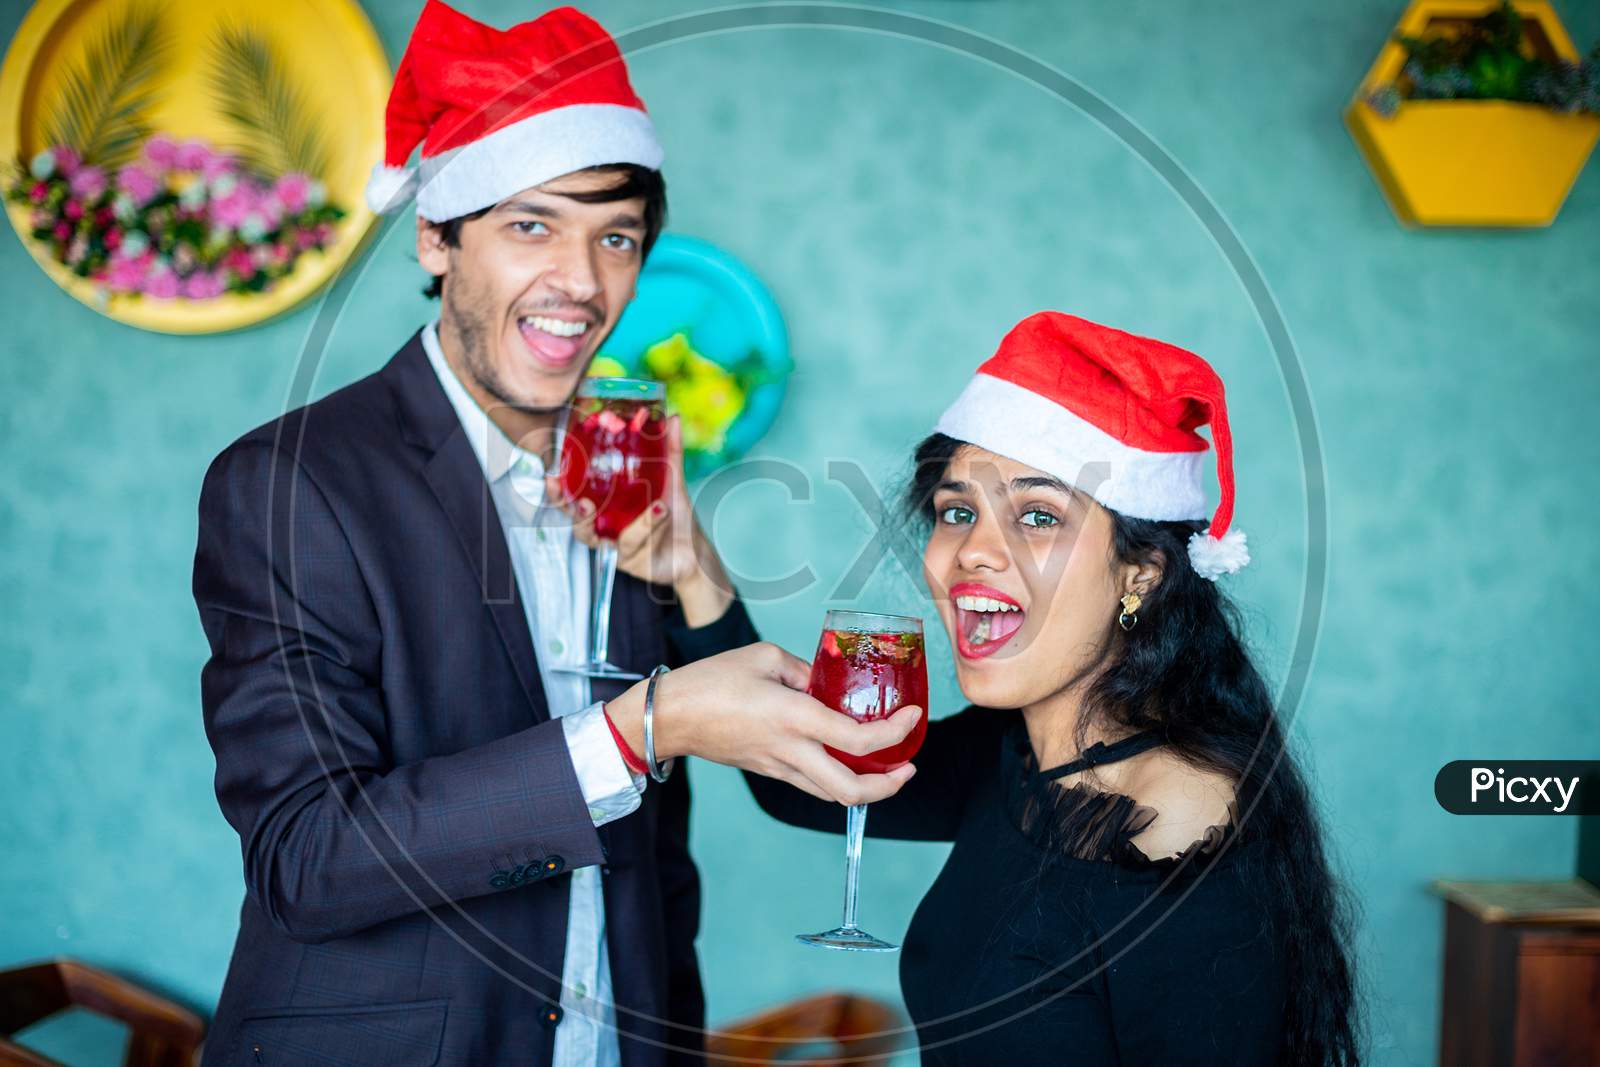 Happy Young Couple In Santa Hats Celebrating Christmas Together While Having Fun With Red Cocktail Drink Glasses Love, Bonding, Copy Space.